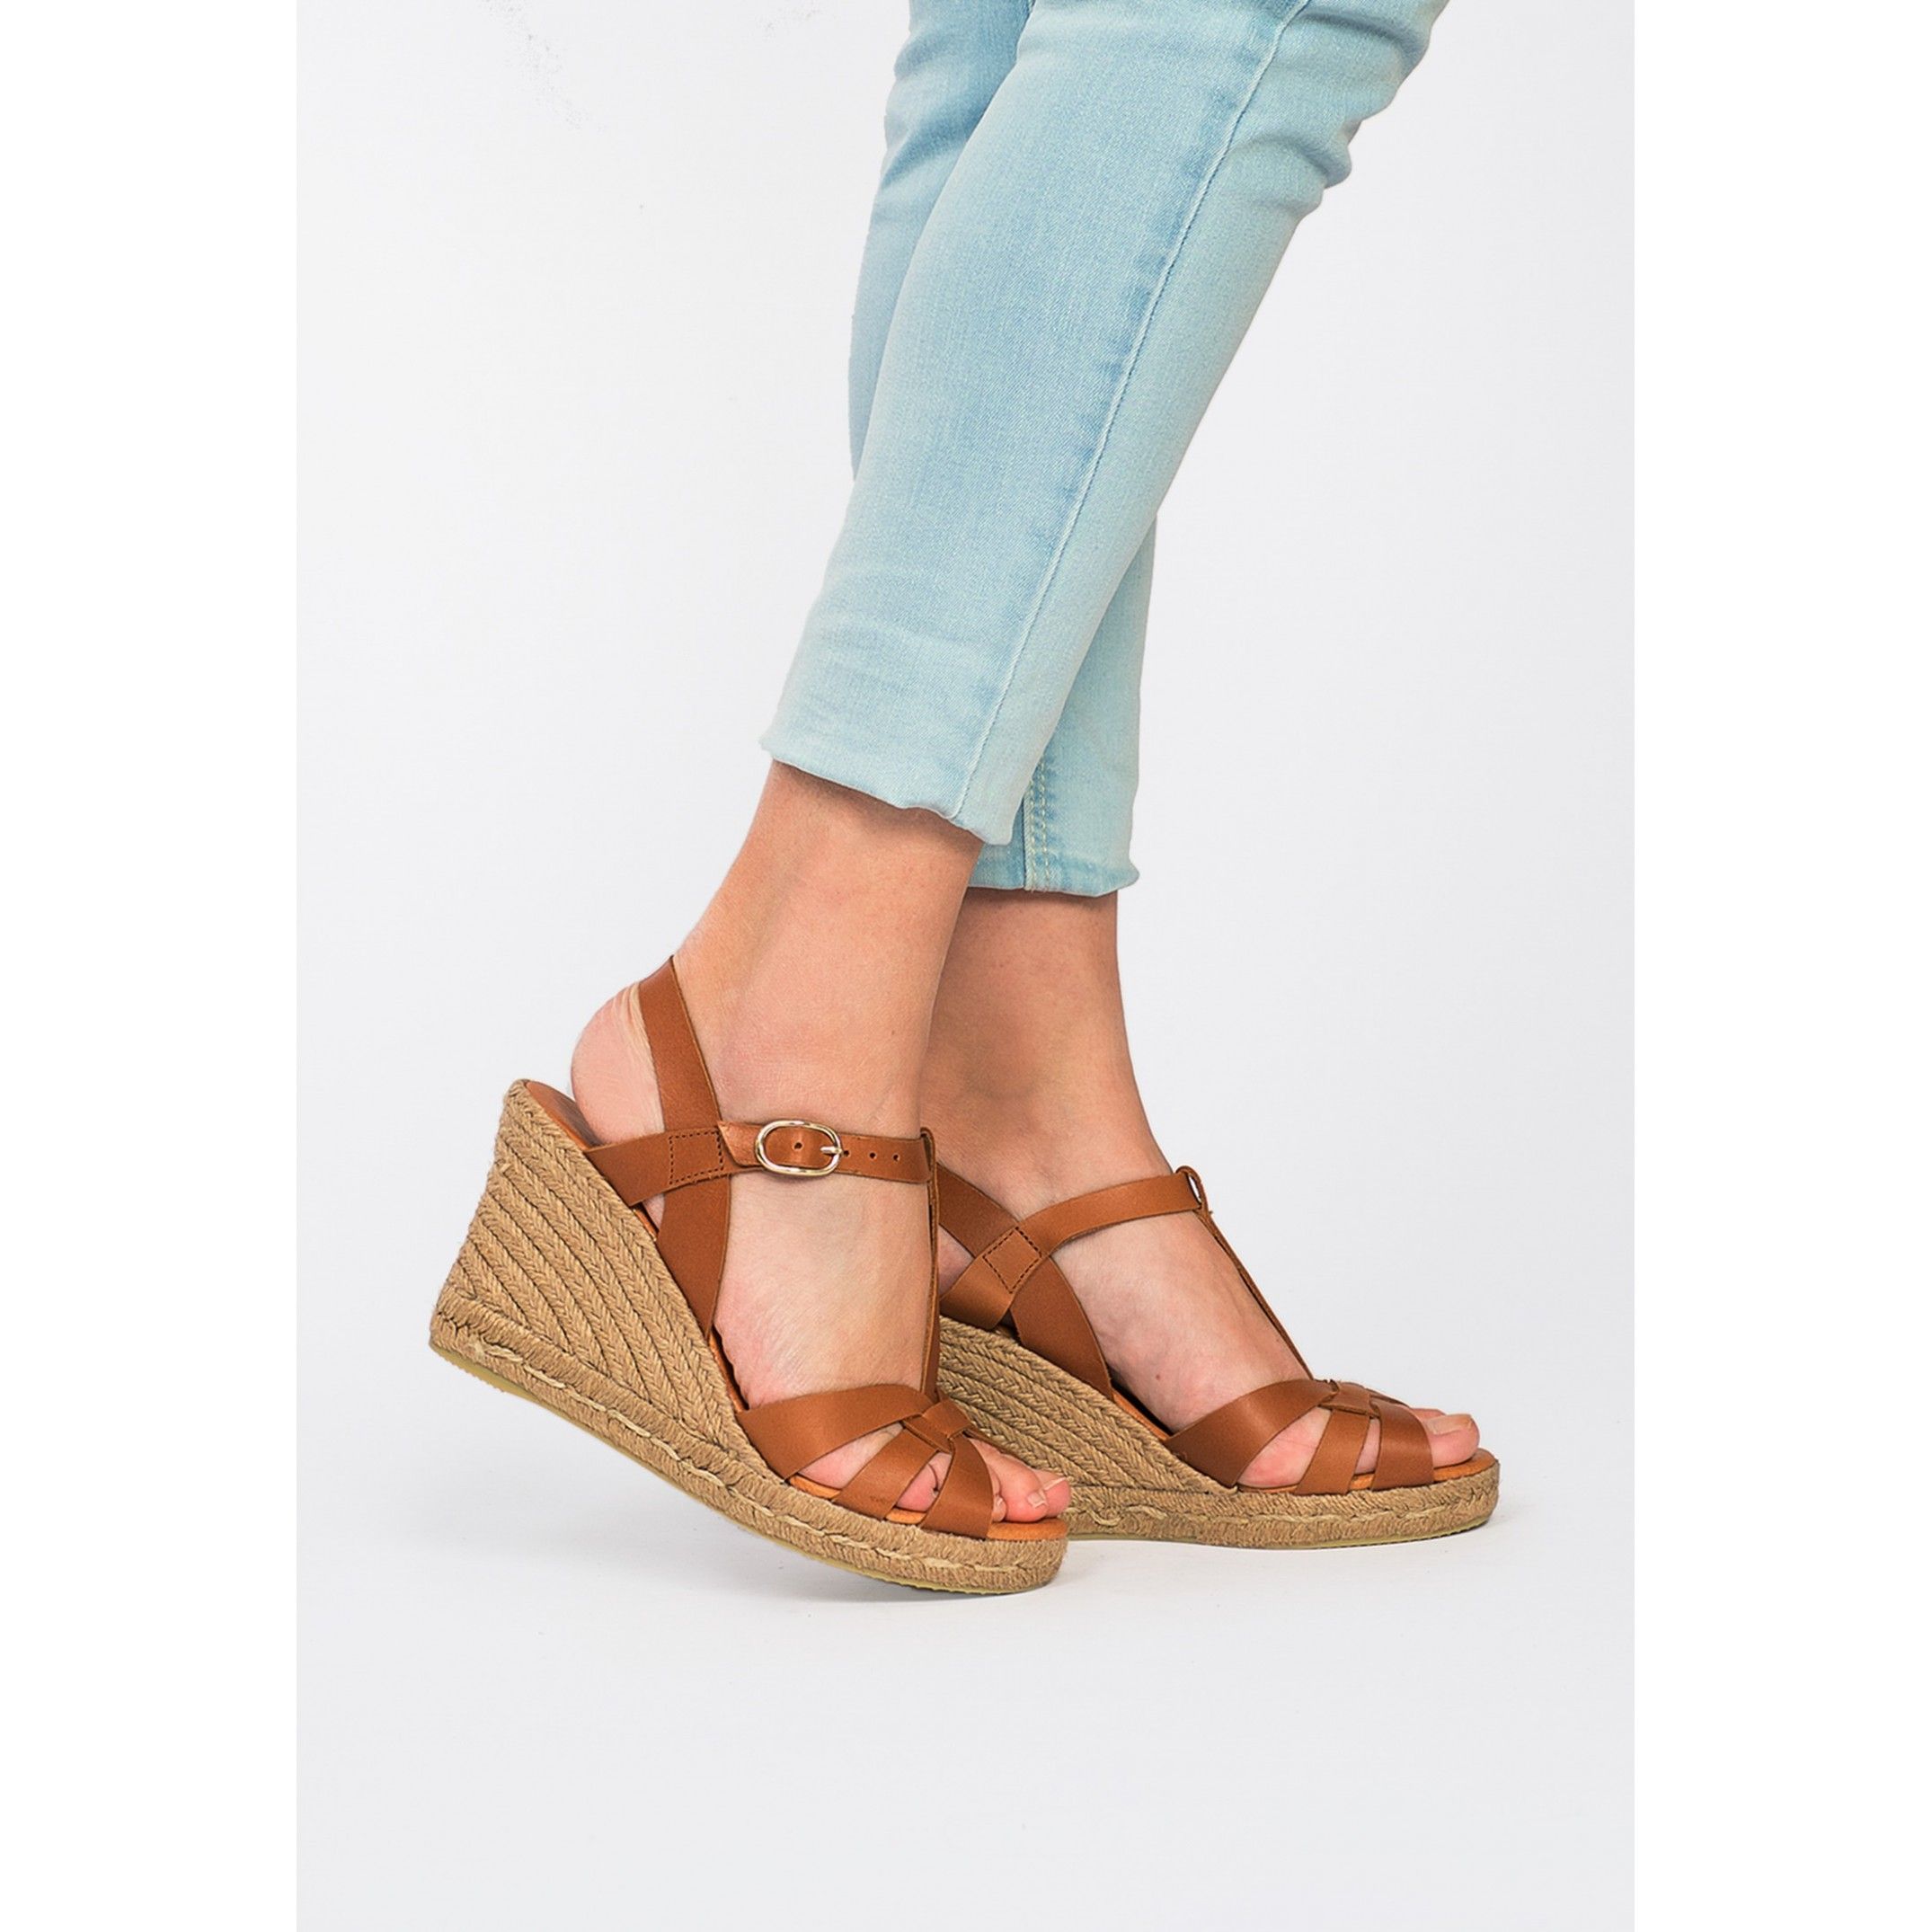 Ankle strap wedge sandals for women. By Eva Lopez Shoes. Upper made of cowhide leather. Metal buckle closure. Inner lining and insole: pig lining. Padded shoe sole: 0.3 cm. Sole material: synthetic. Heel height: 8 cm. Platform: 2 cm Designed and manufactured in Spain.